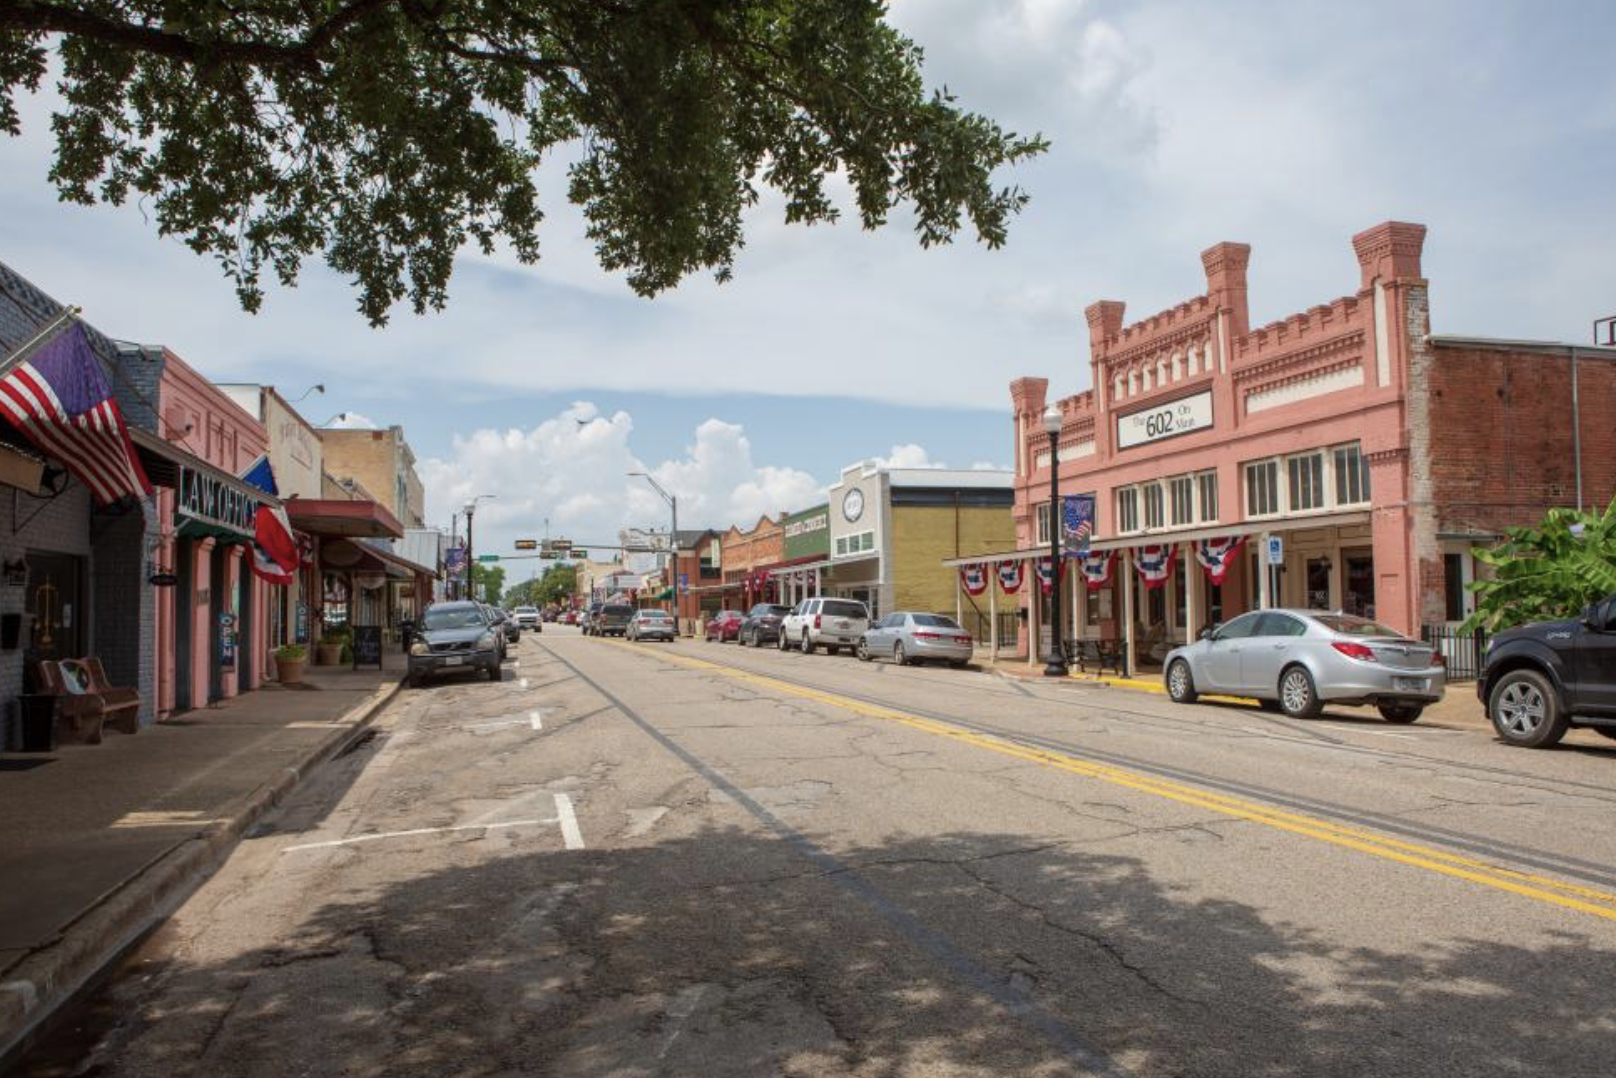 Case Study: The Retail Coach Helps Fire-Ravaged Bastrop, TX Focus on Retail Recovery